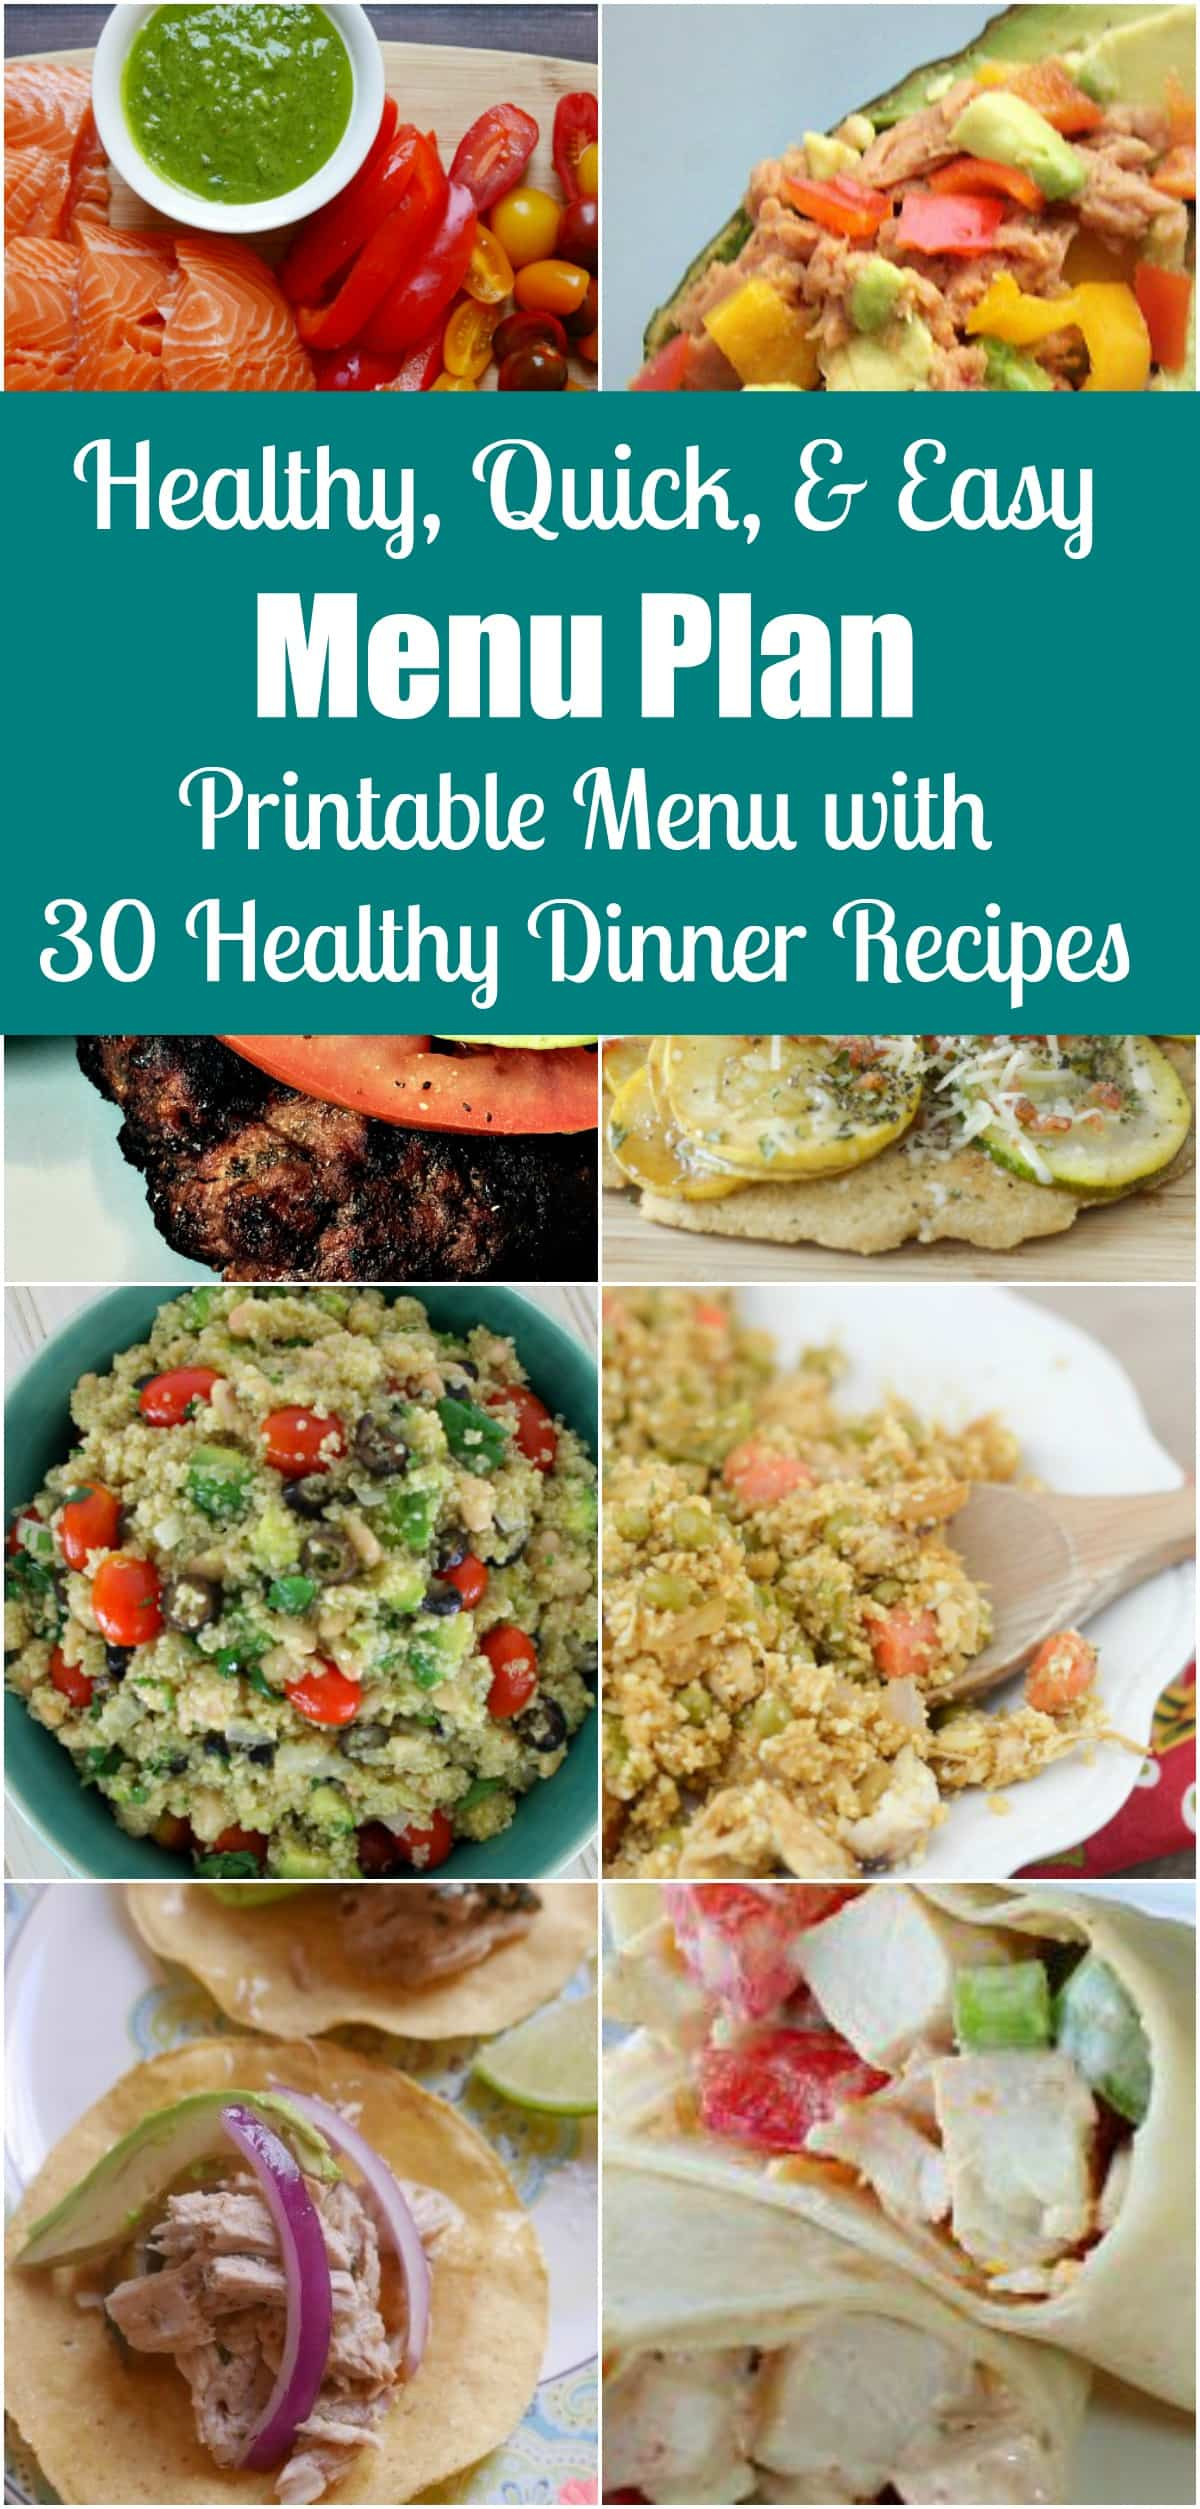 Quick Easy Healthy Dinner Recipes
 Quick Easy & Healthy Dinner Menu Plan 30 Simple Recipes